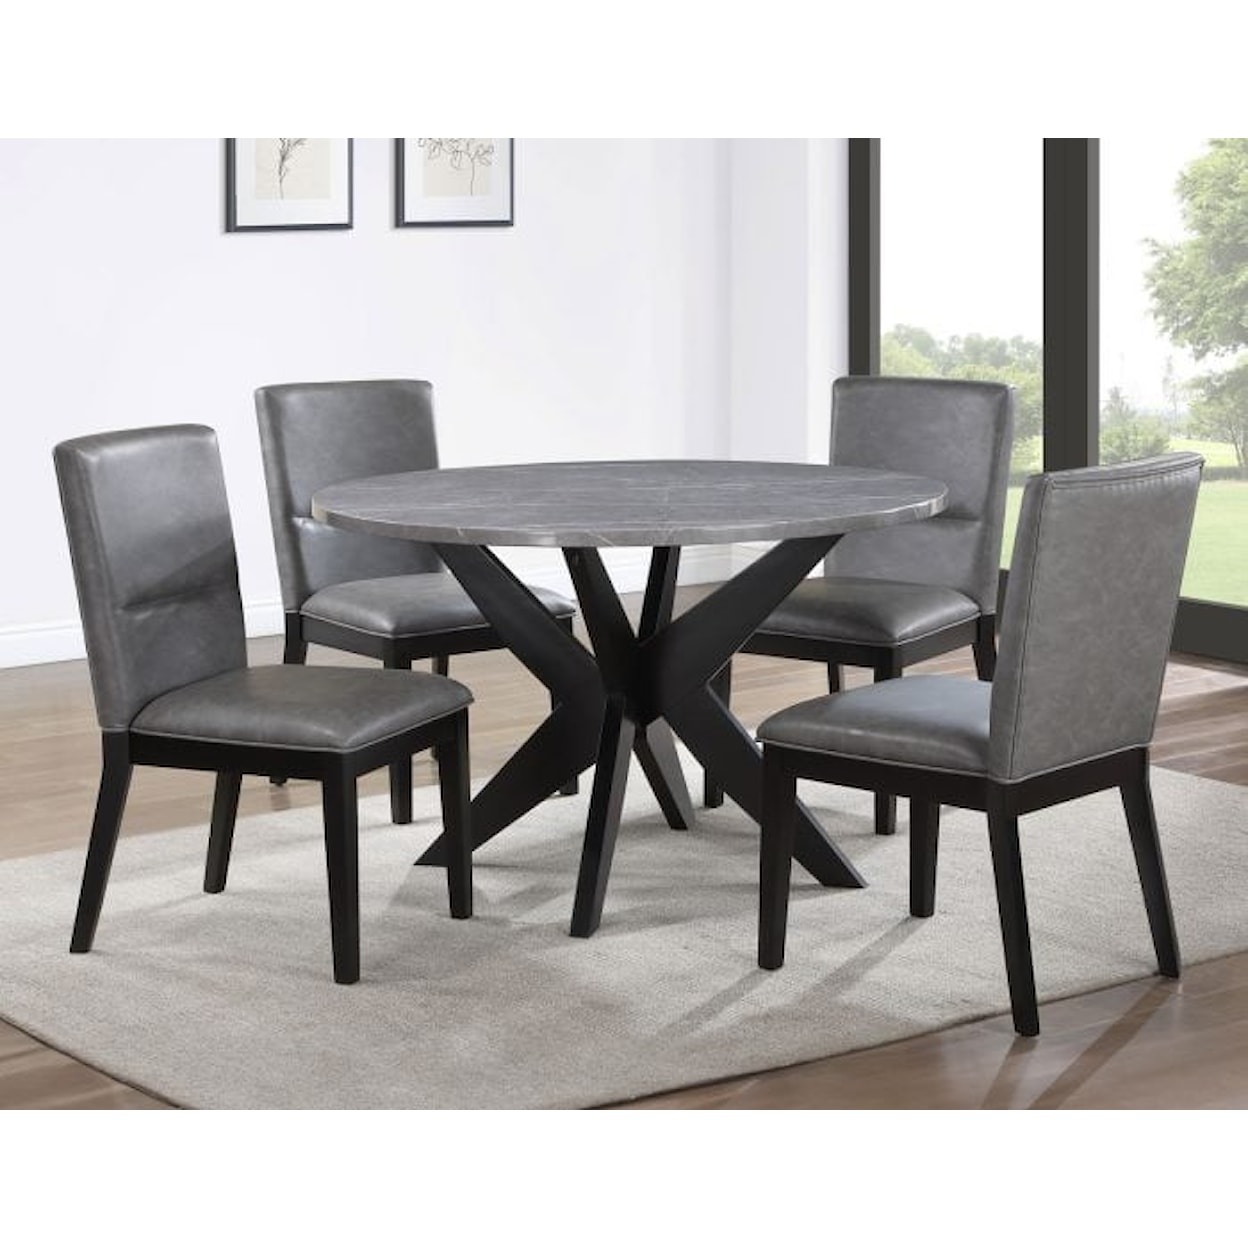 Steve Silver Amy Dining Table